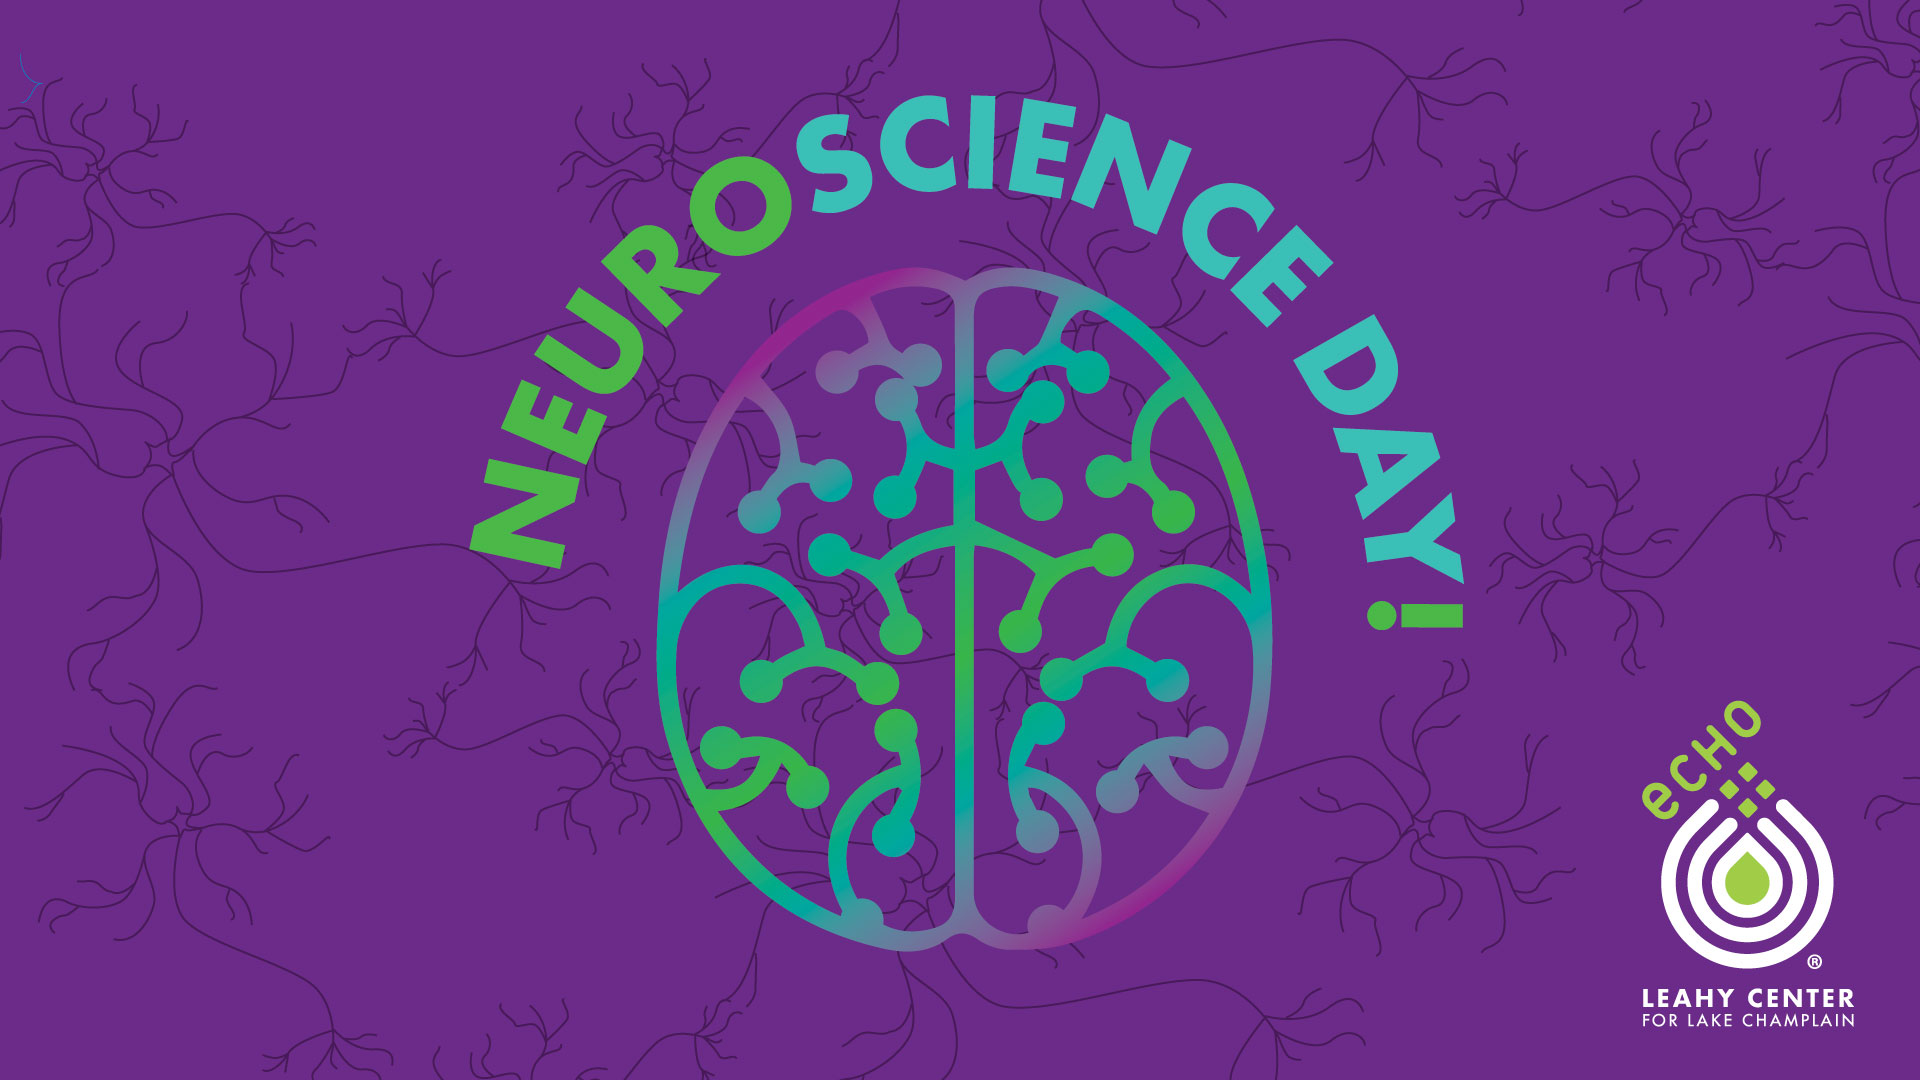 NeuroScience Day with graphics of a brain and neurons, synapses.